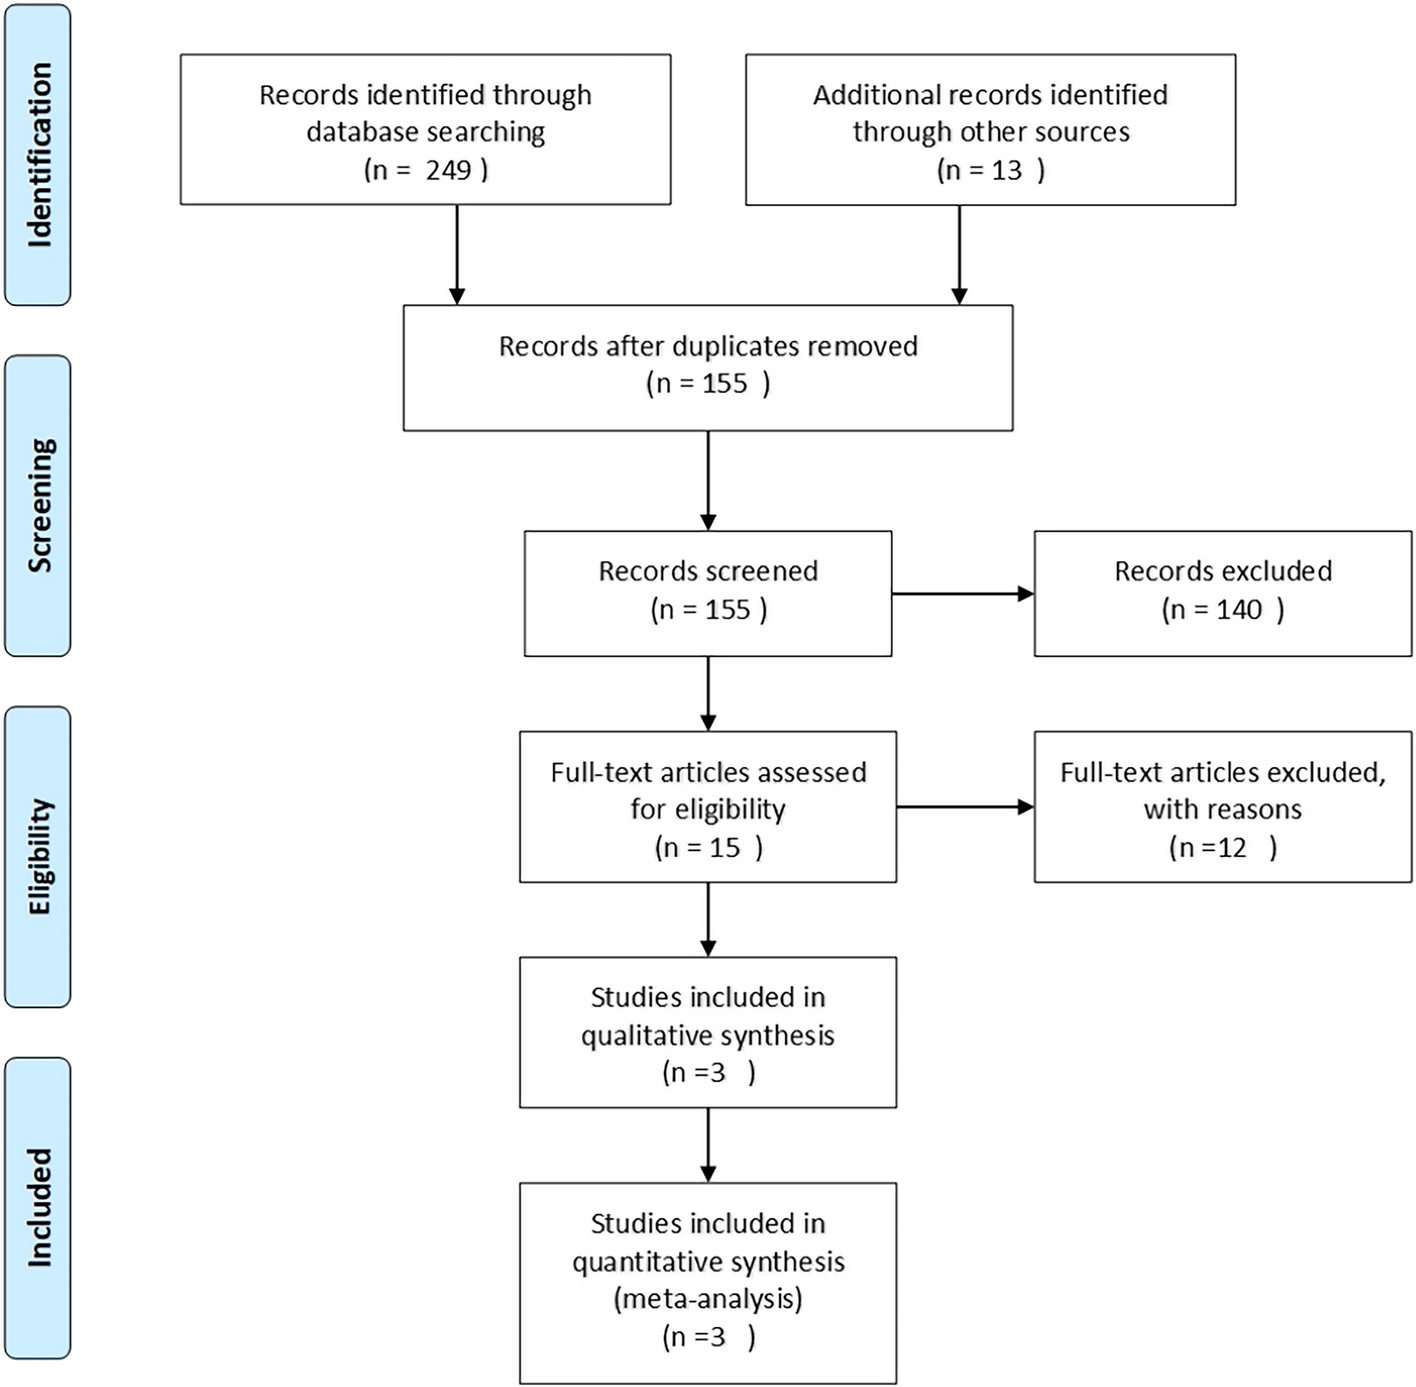 A systematic review of the effects of hepatitis B and C virus on the progression of liver fluke infection to liver cancer